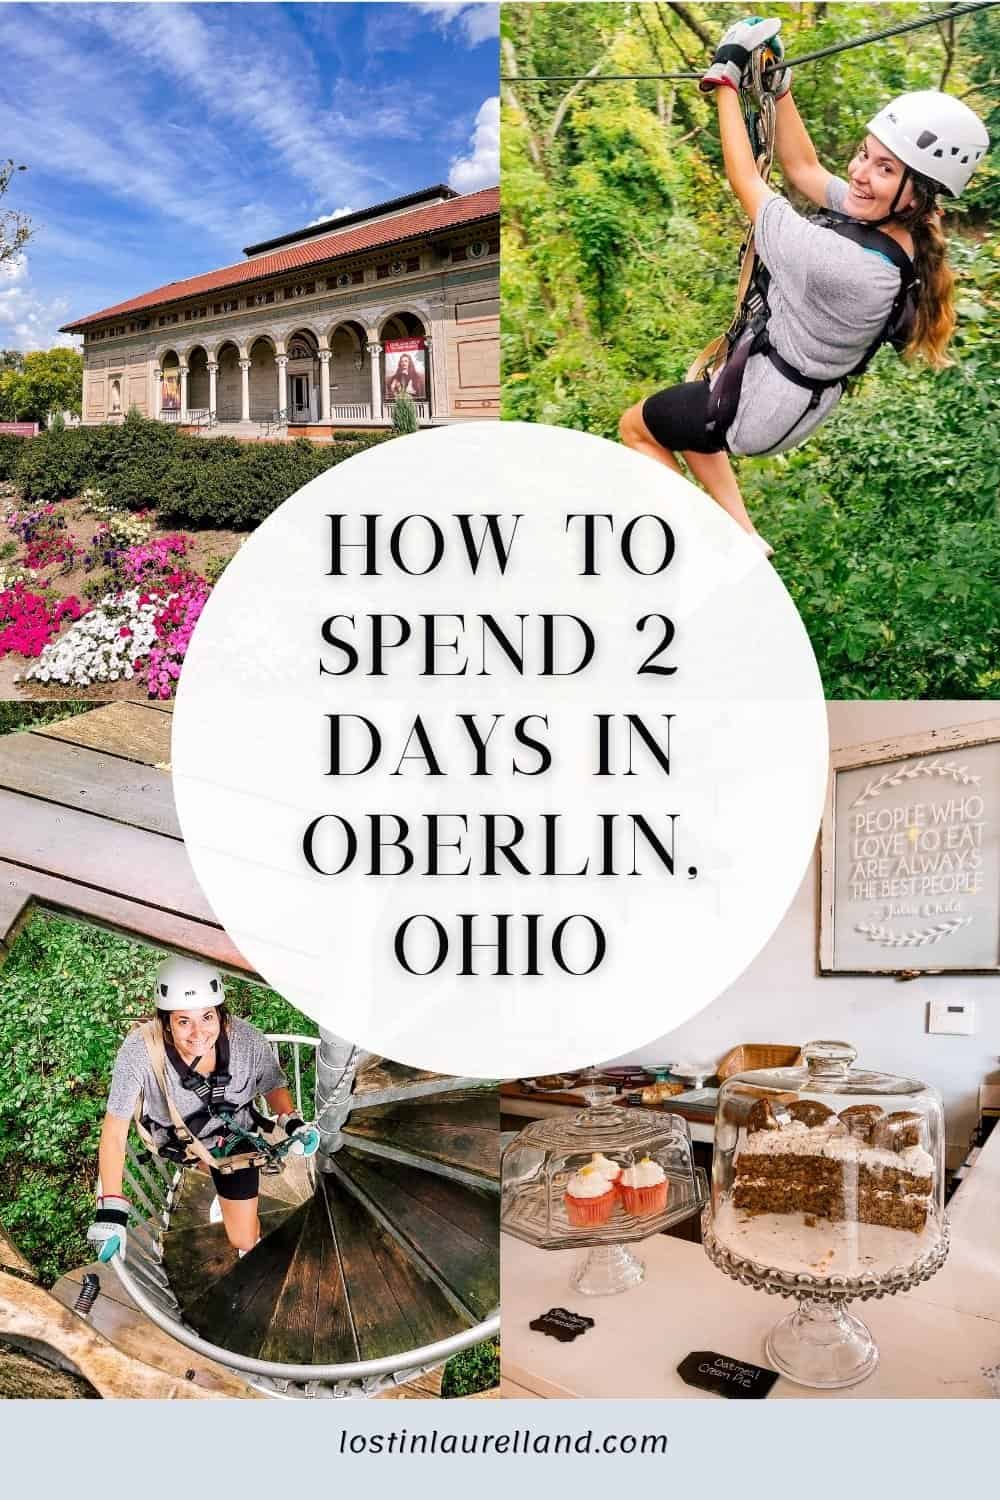 How To Spend 2 Perfect Days In Oberlin, Ohio This Fall